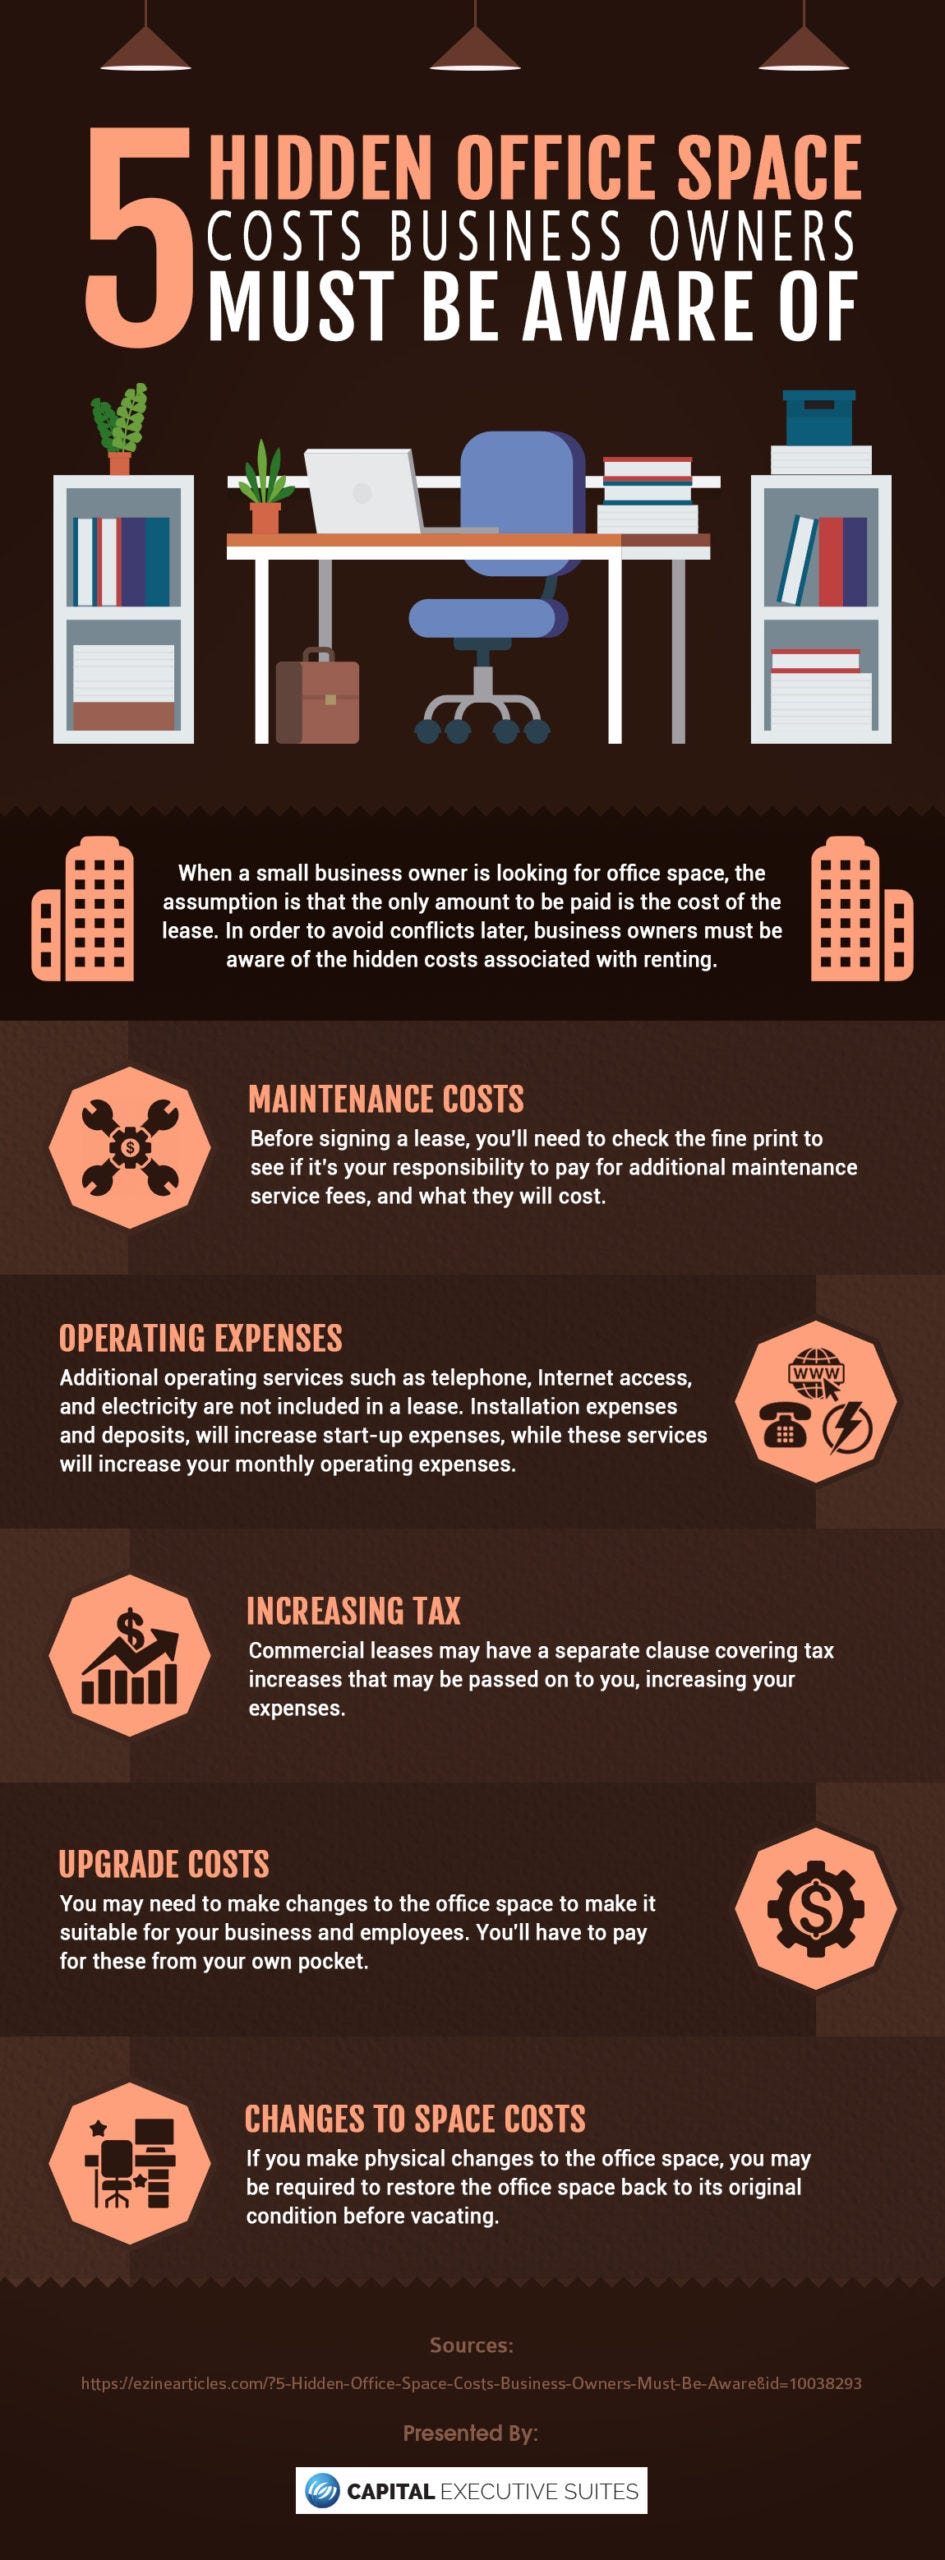 5 Hidden Office Space Costs Business Owners must be Aware Of